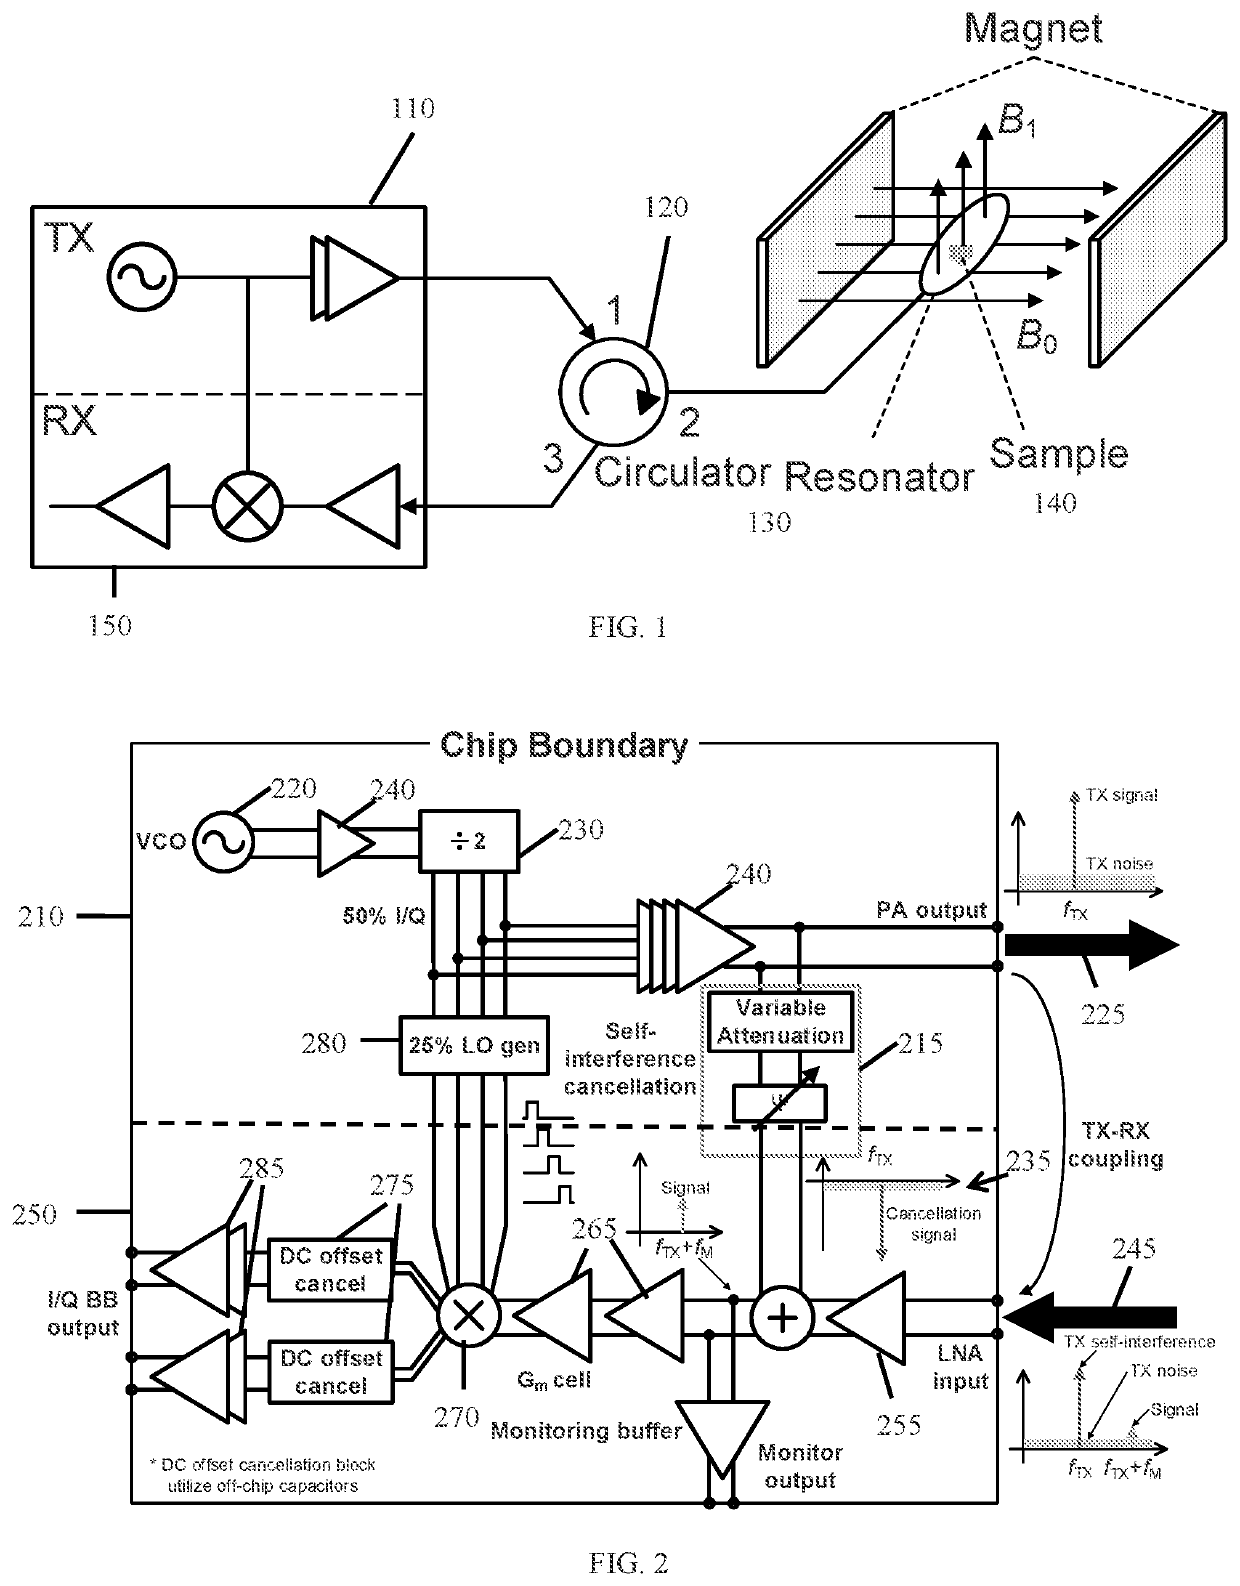 Electron paramagnetic resonance (EPR) systems with active cancellation